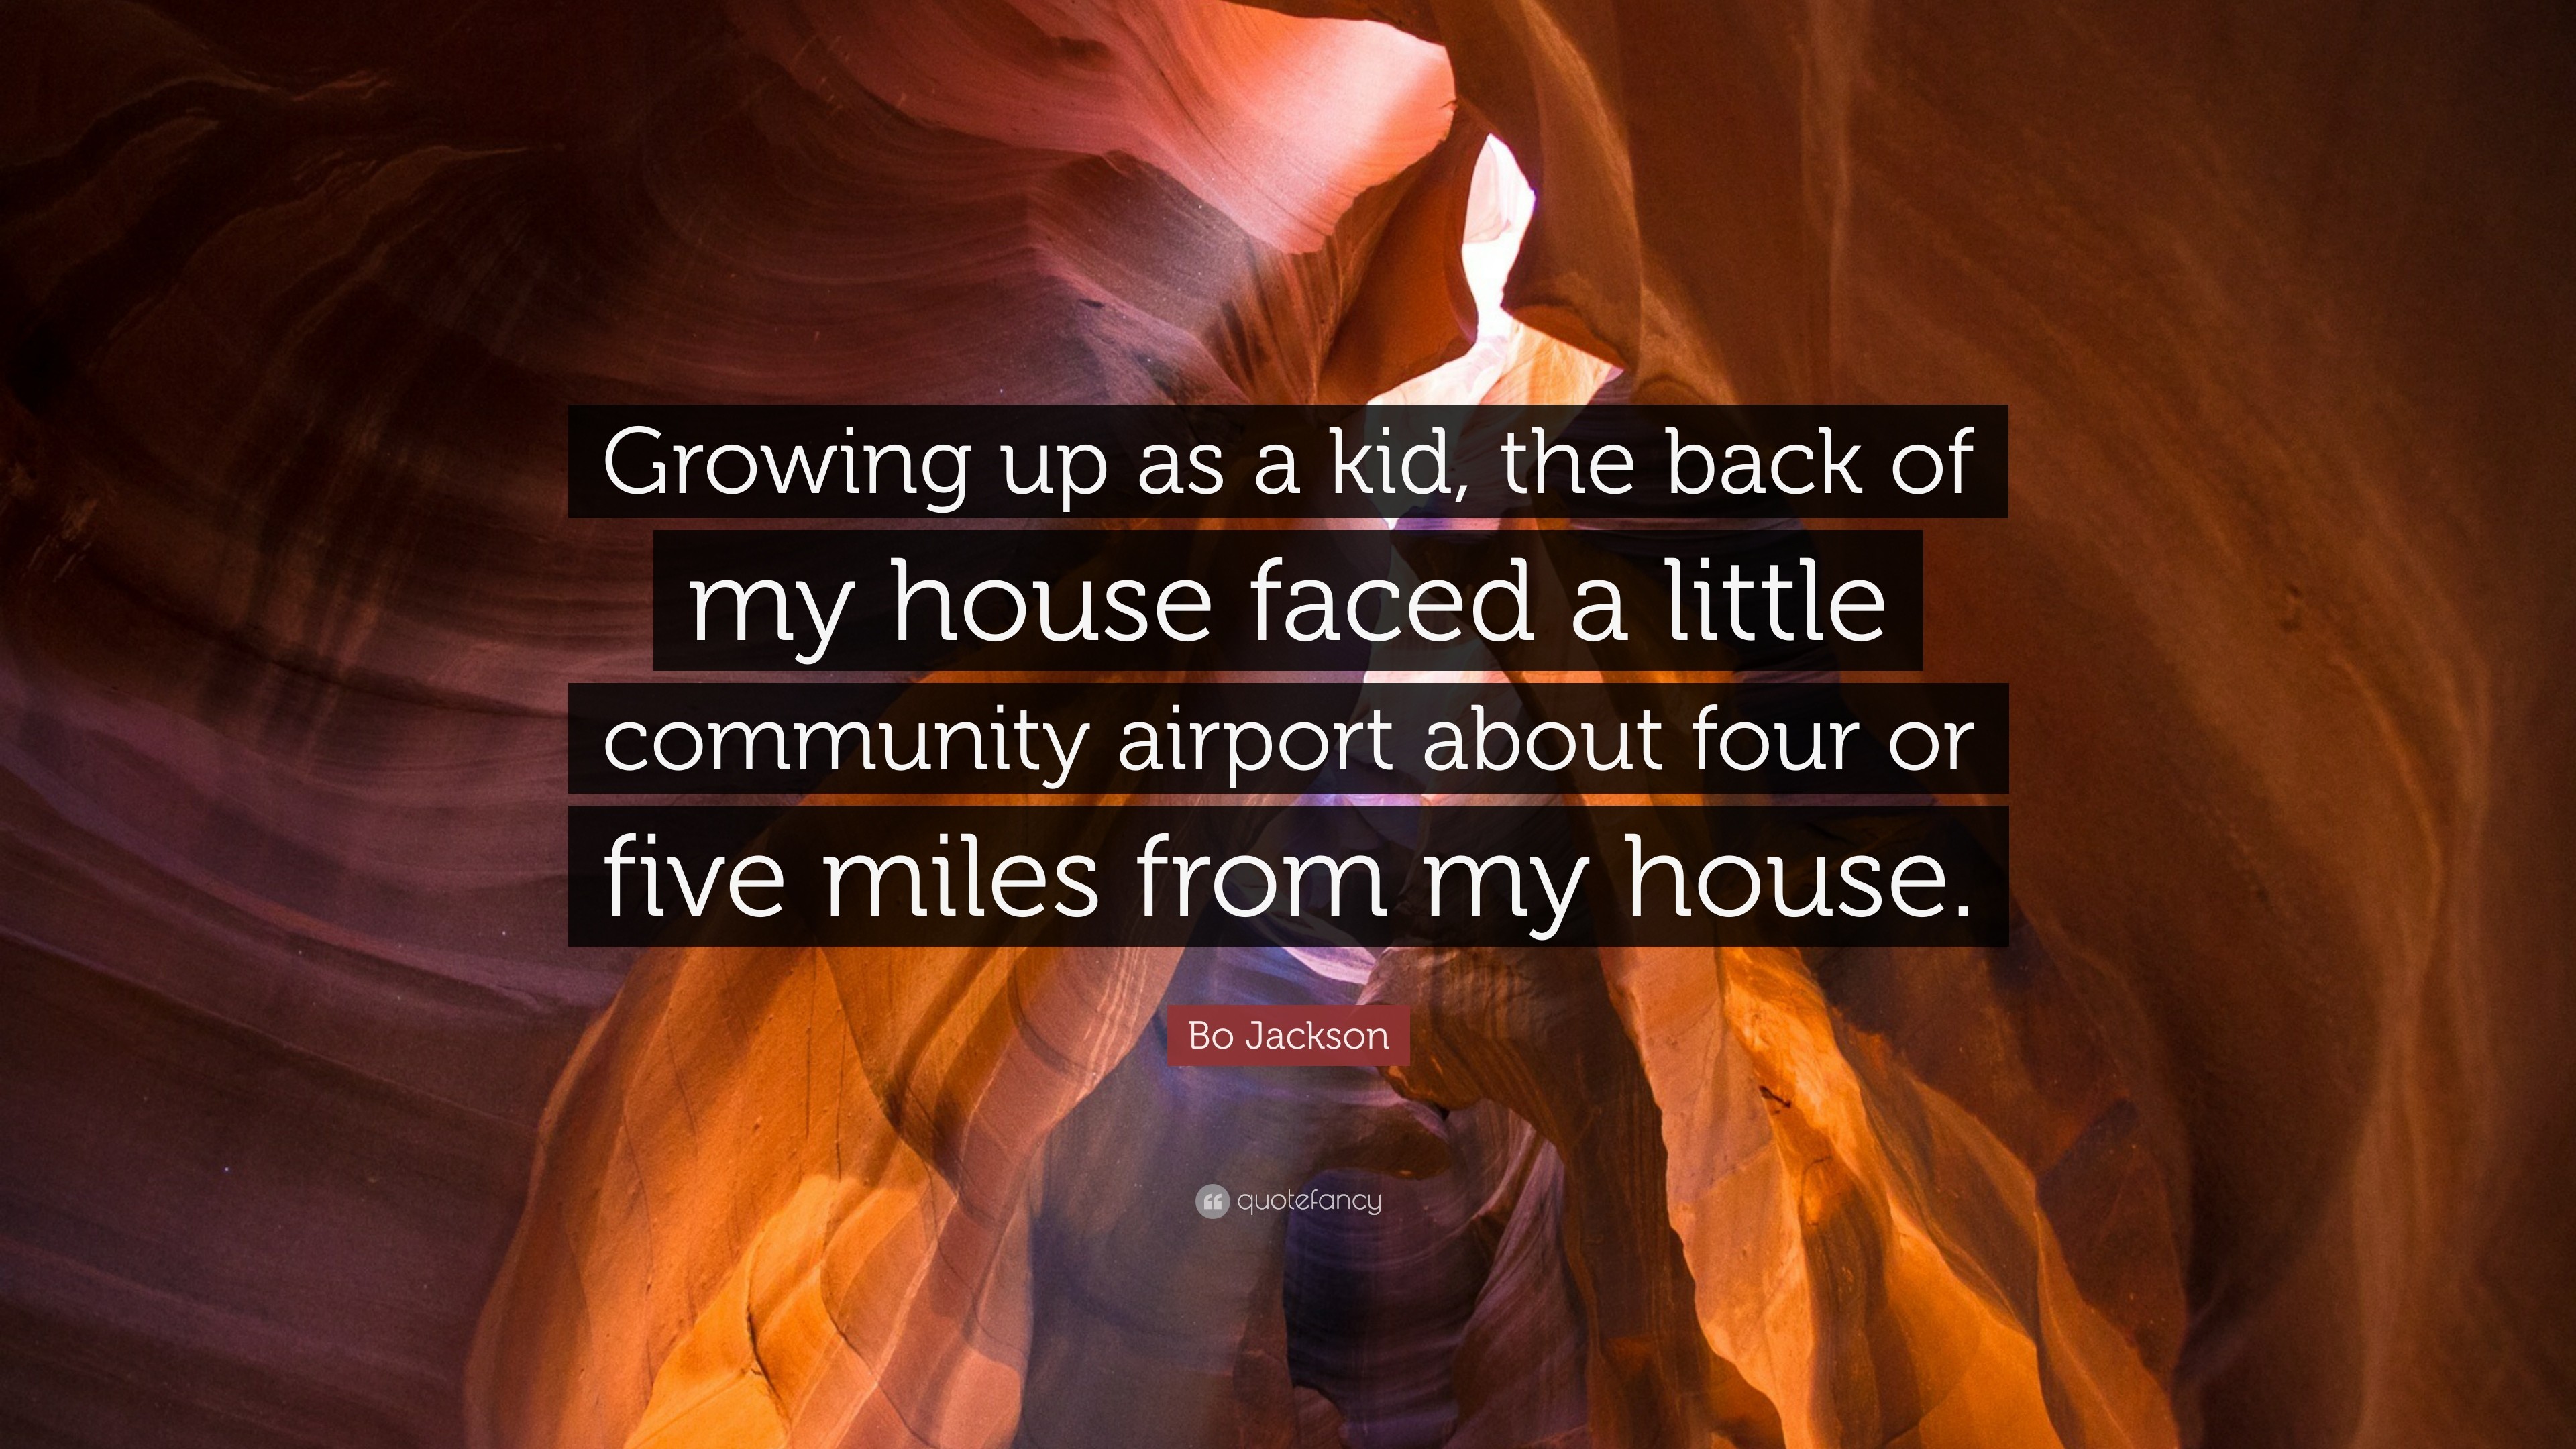 3840x2160 Bo Jackson Quote: “Growing up as a kid, the back of my house